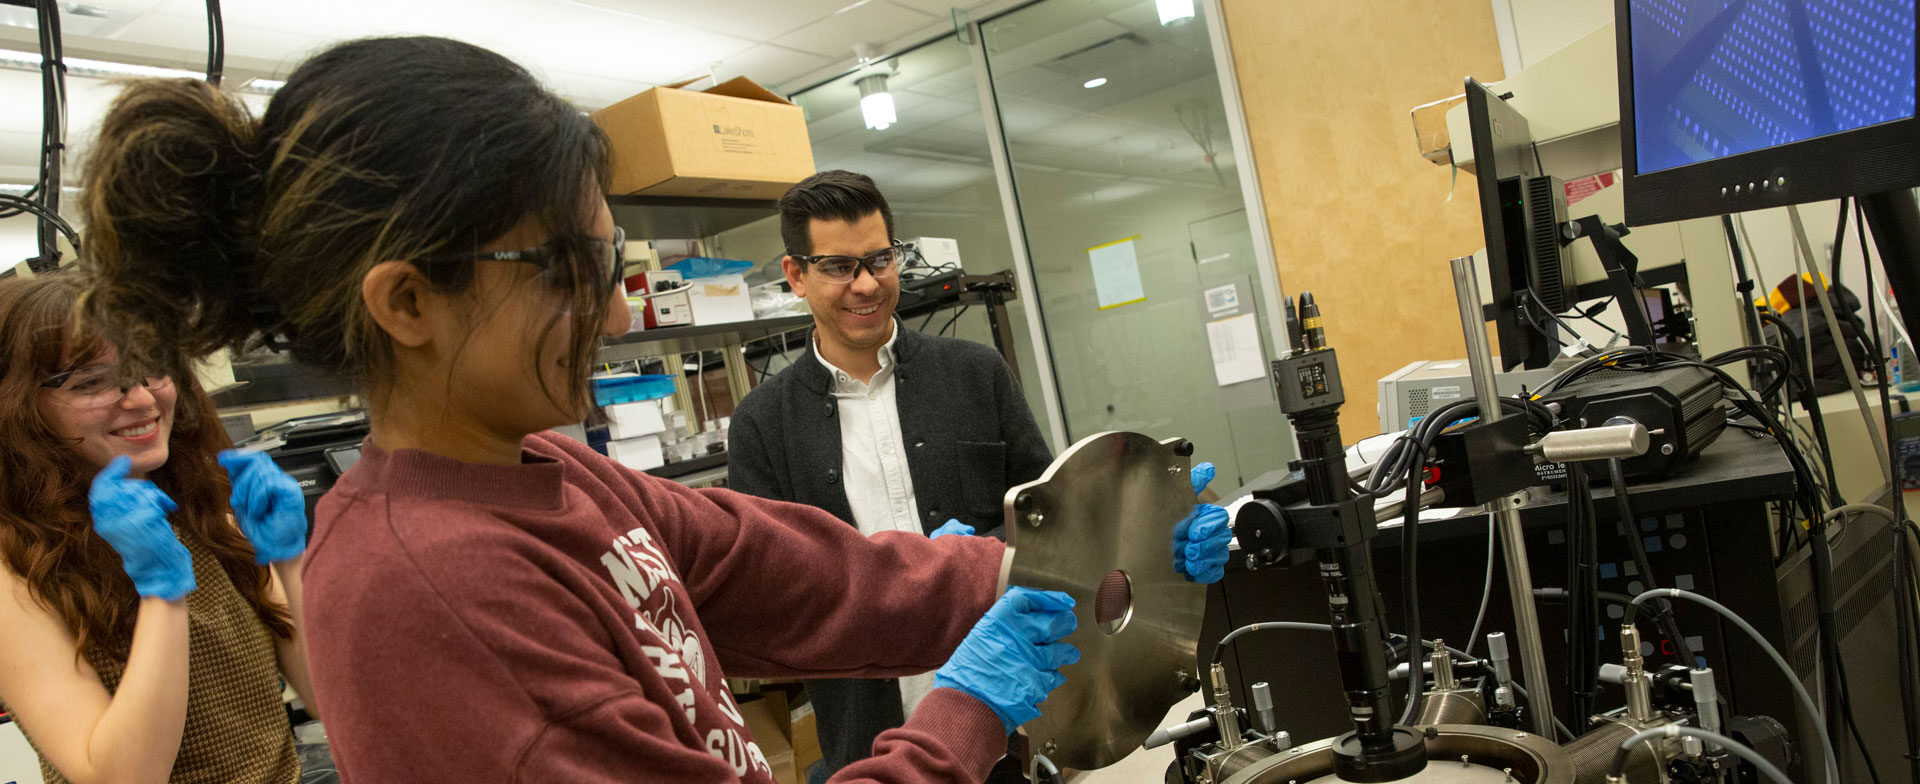 FURI student Priyanka Ravindran reconfigures a machine which uses layers of 2D materials in neuromorphic or “brain-inspired” computing operation.